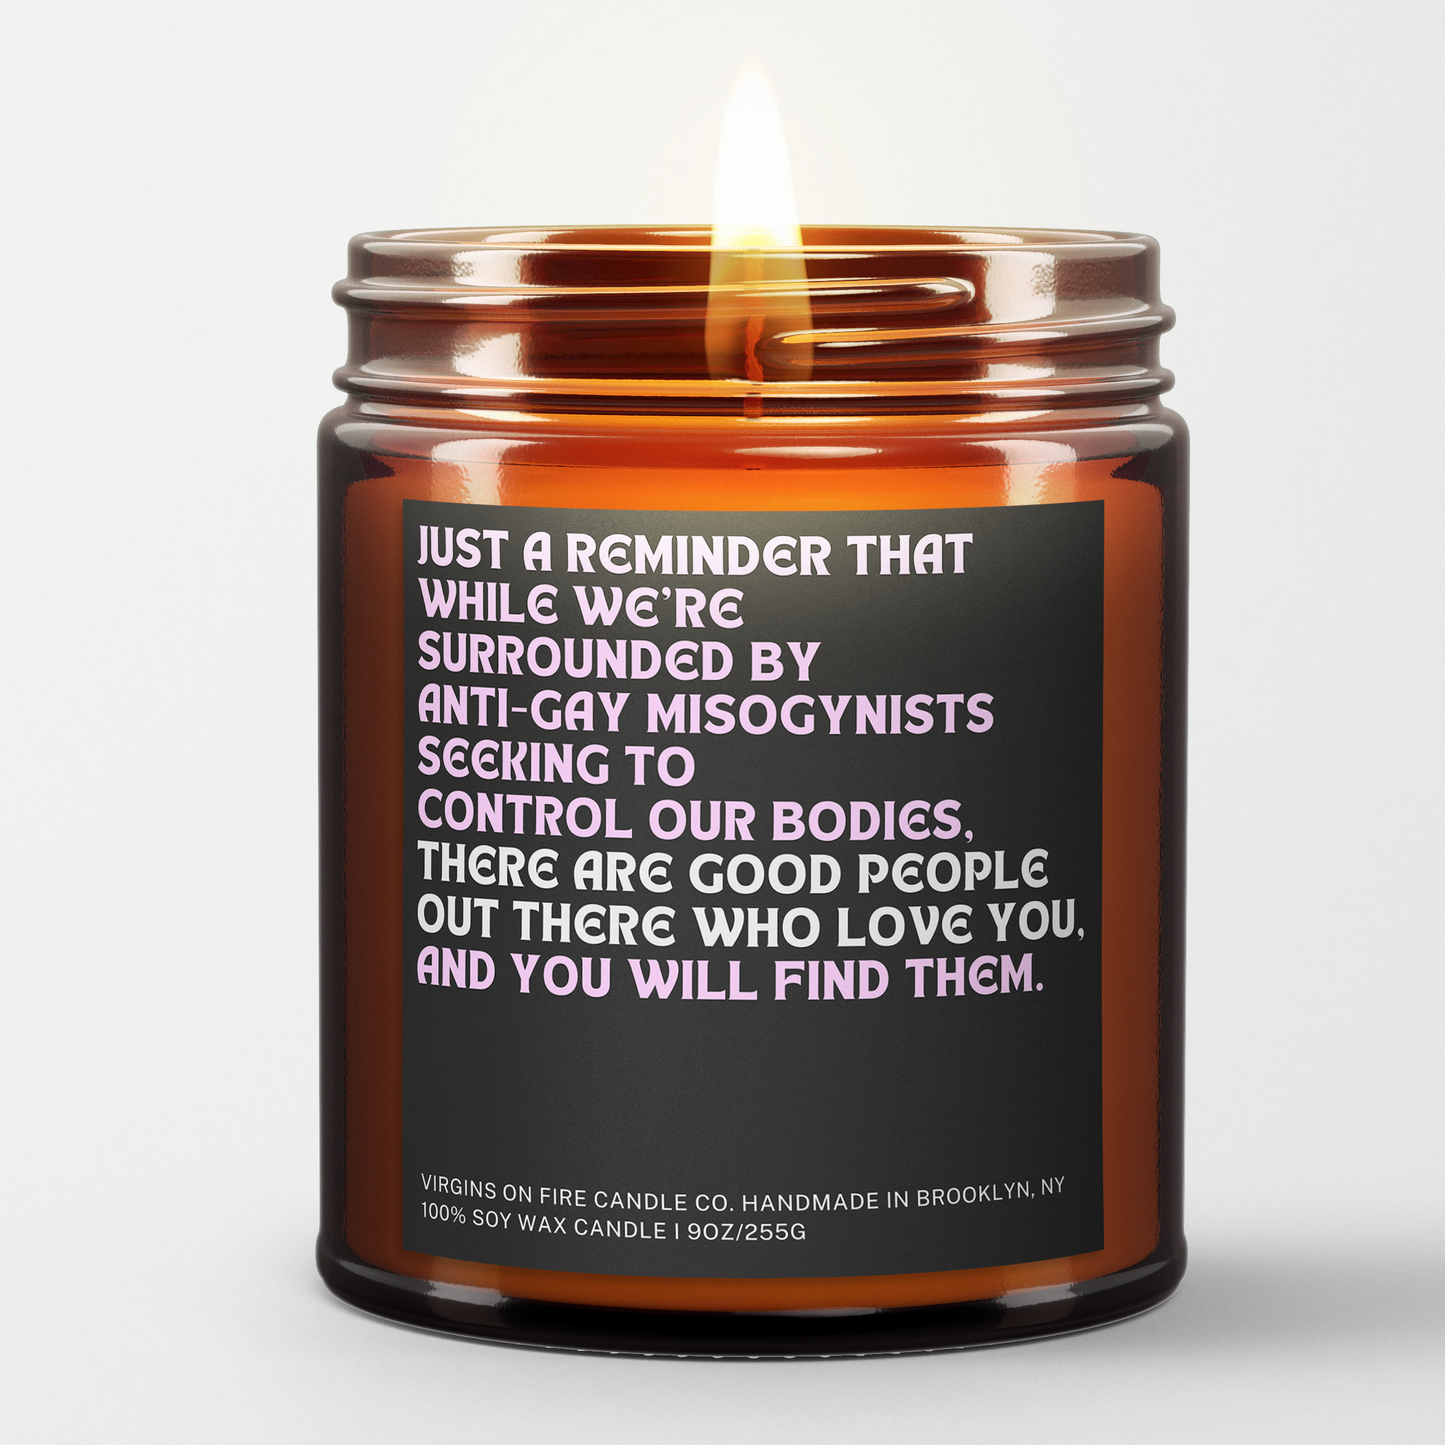 Virgins On Fire Candle Co. - SURROUNDED BY ANTI-GAY MISOGYNISTS... (Matcha & Bergamot)